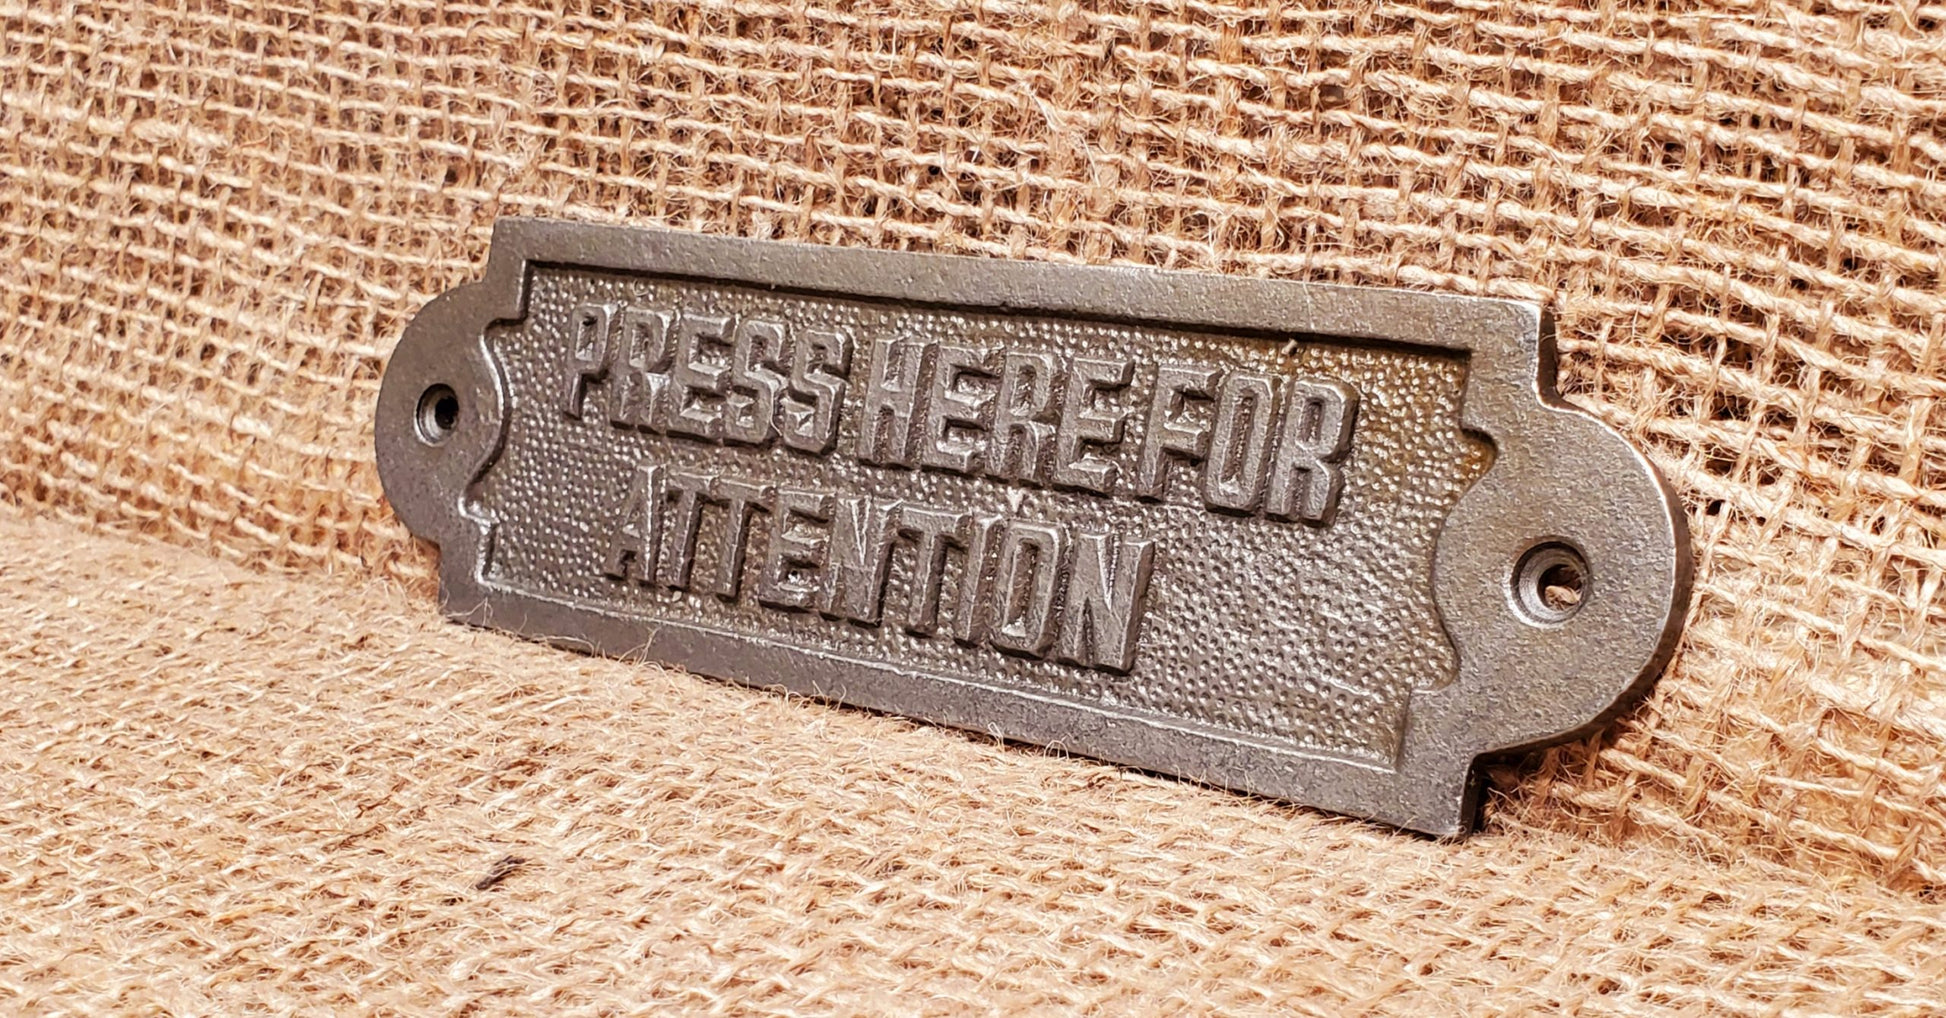 Press Here for Attention - Spearhead Collection - Plaques and Signs - Home Decor, Office Decor, Plaques and Signs